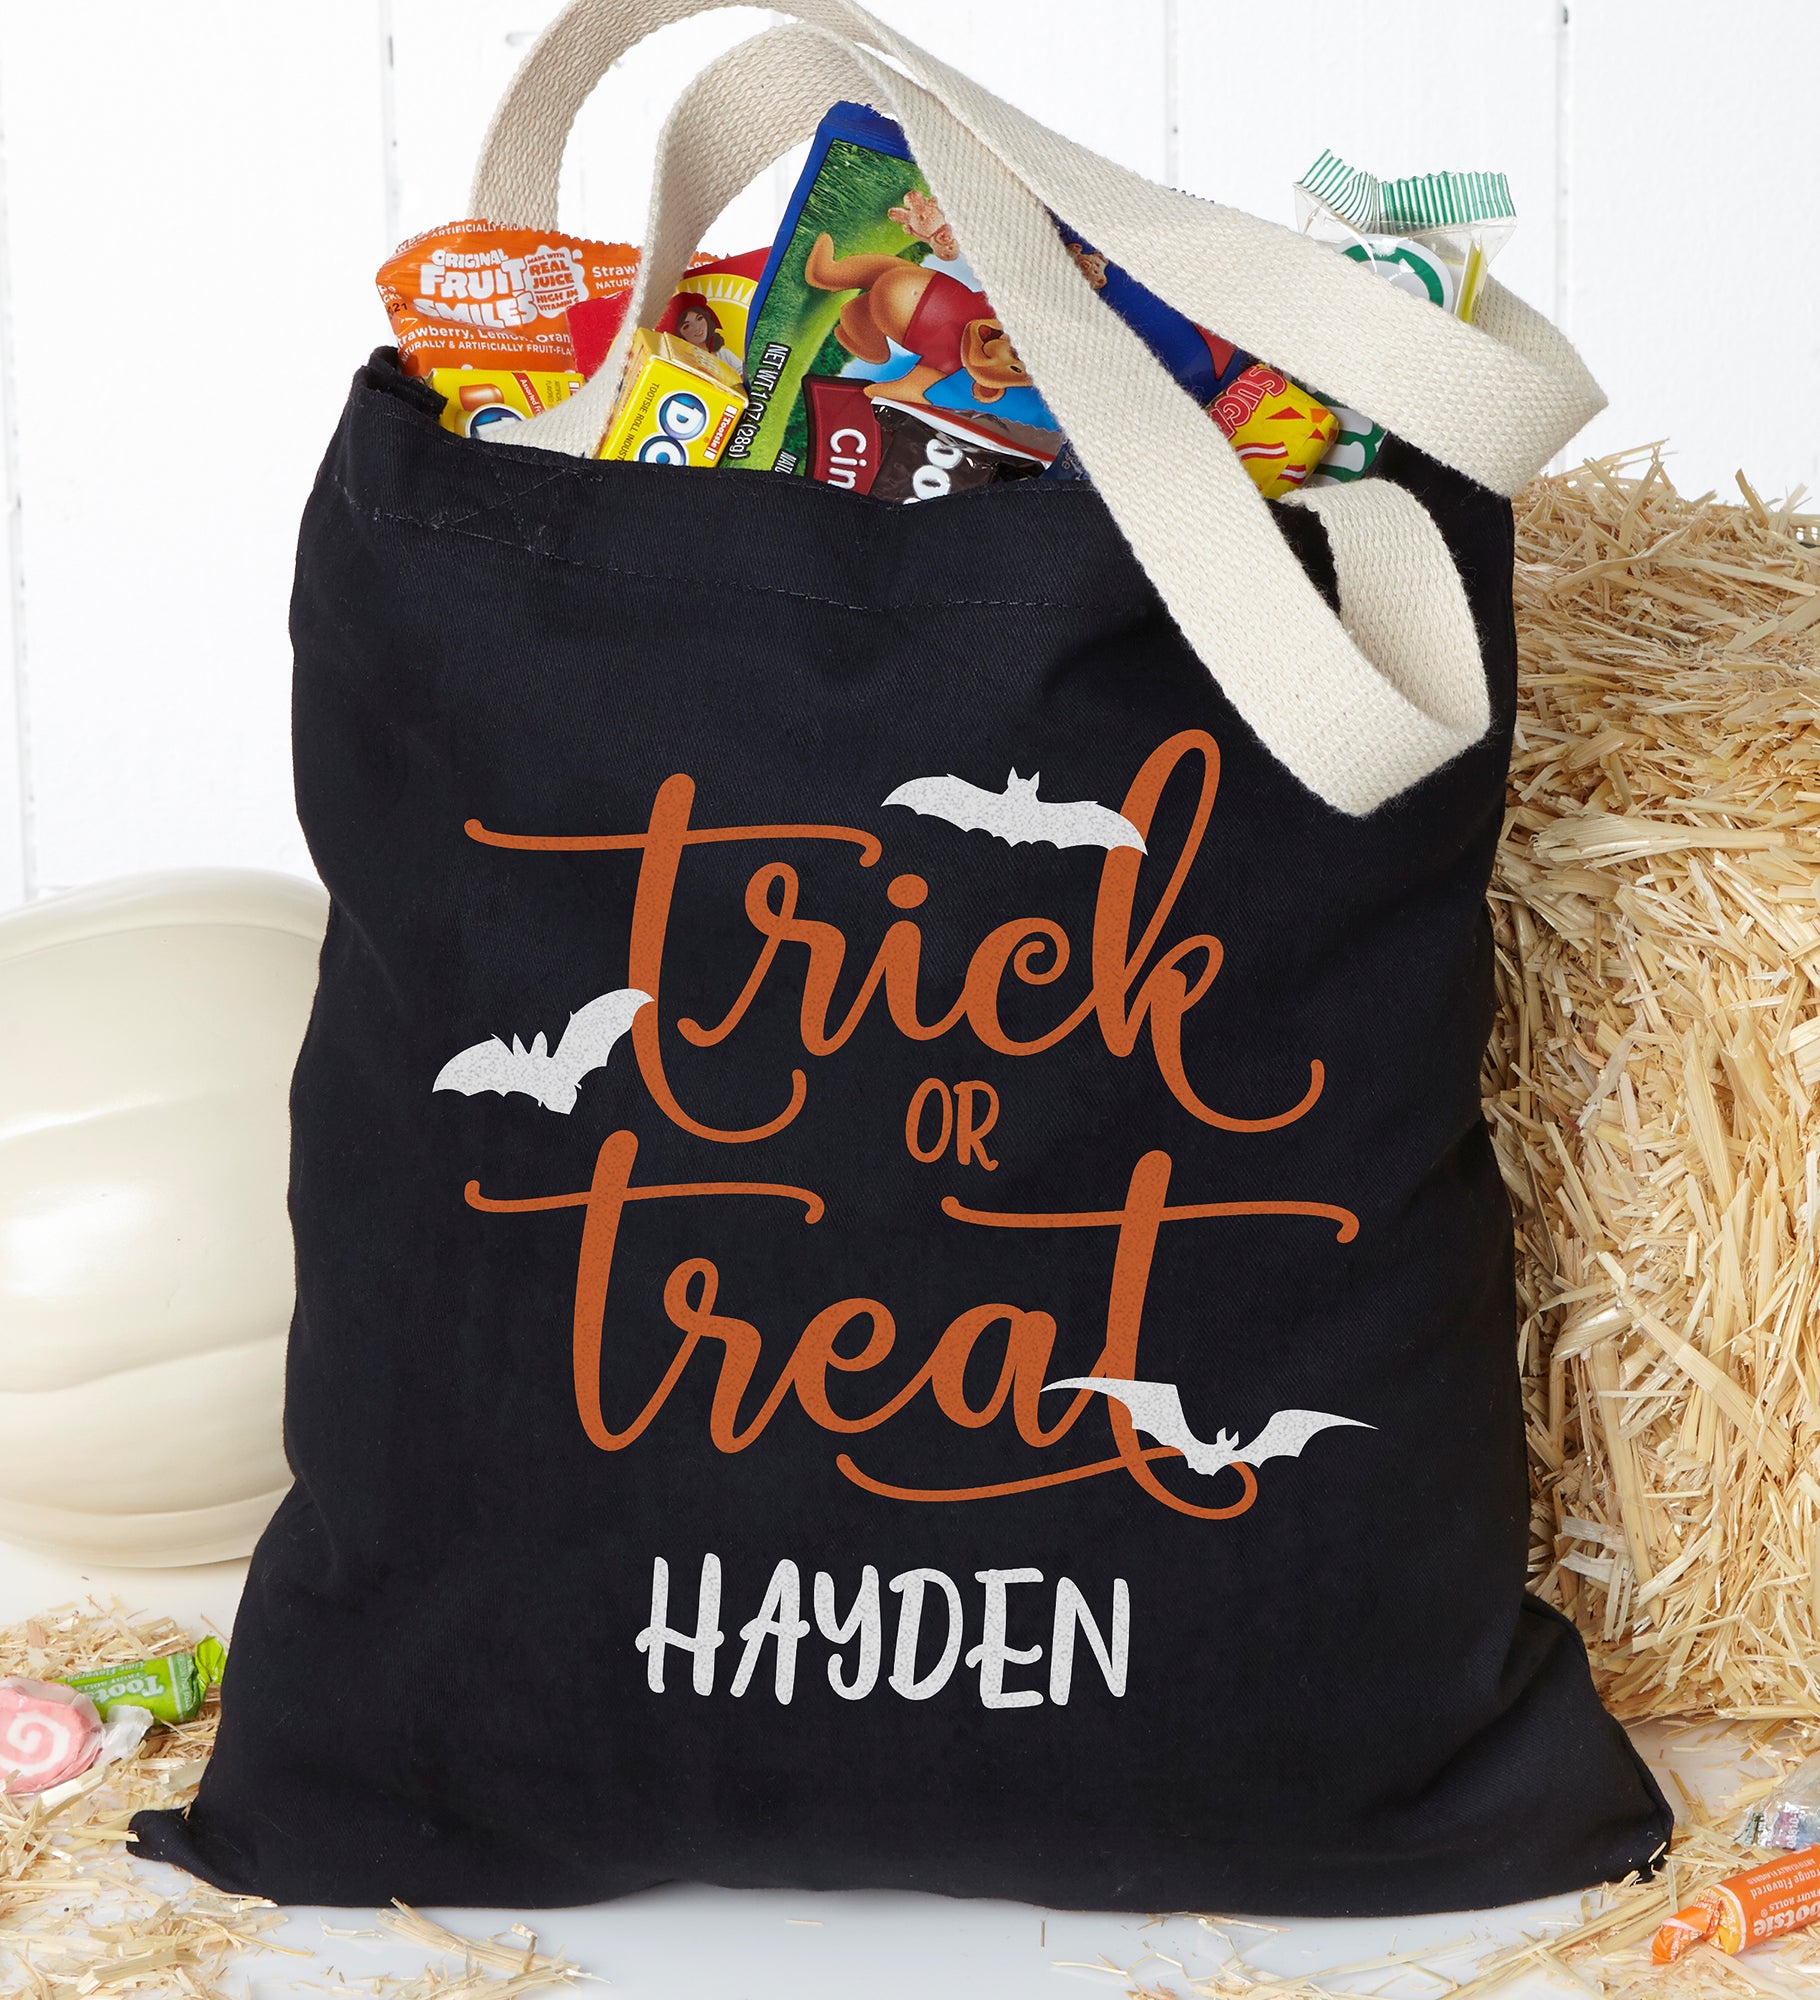 Trick or Treat Personalized Halloween Treat Bag